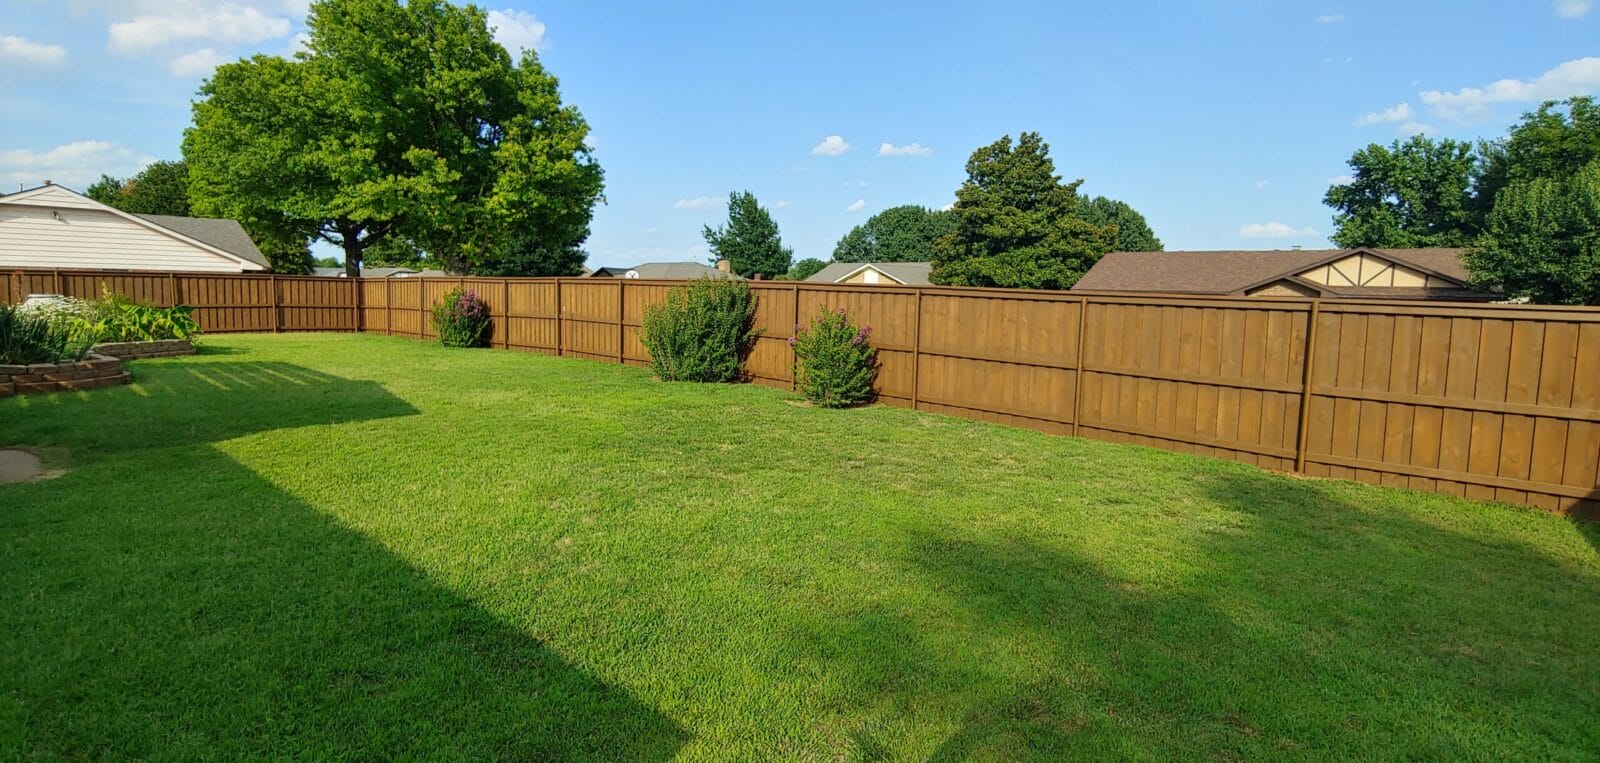 Beautiful Lawn and privacy fence